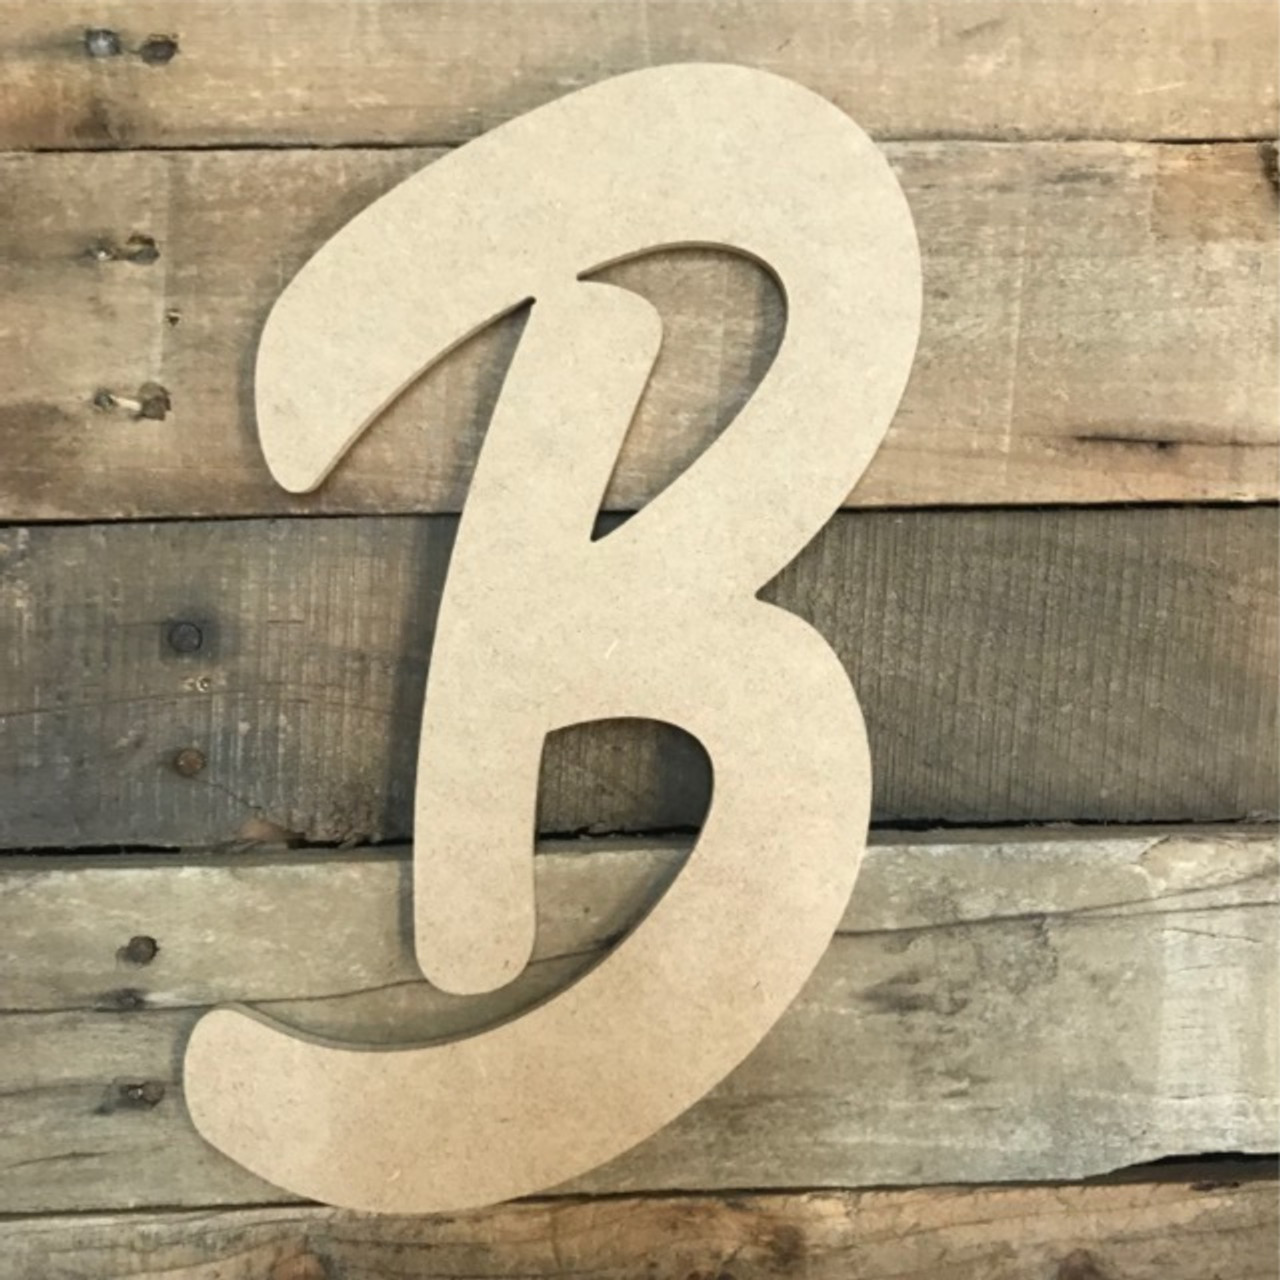 Wooden Letters for Wall, Hanging Wall Letters, Big Wooden Letters